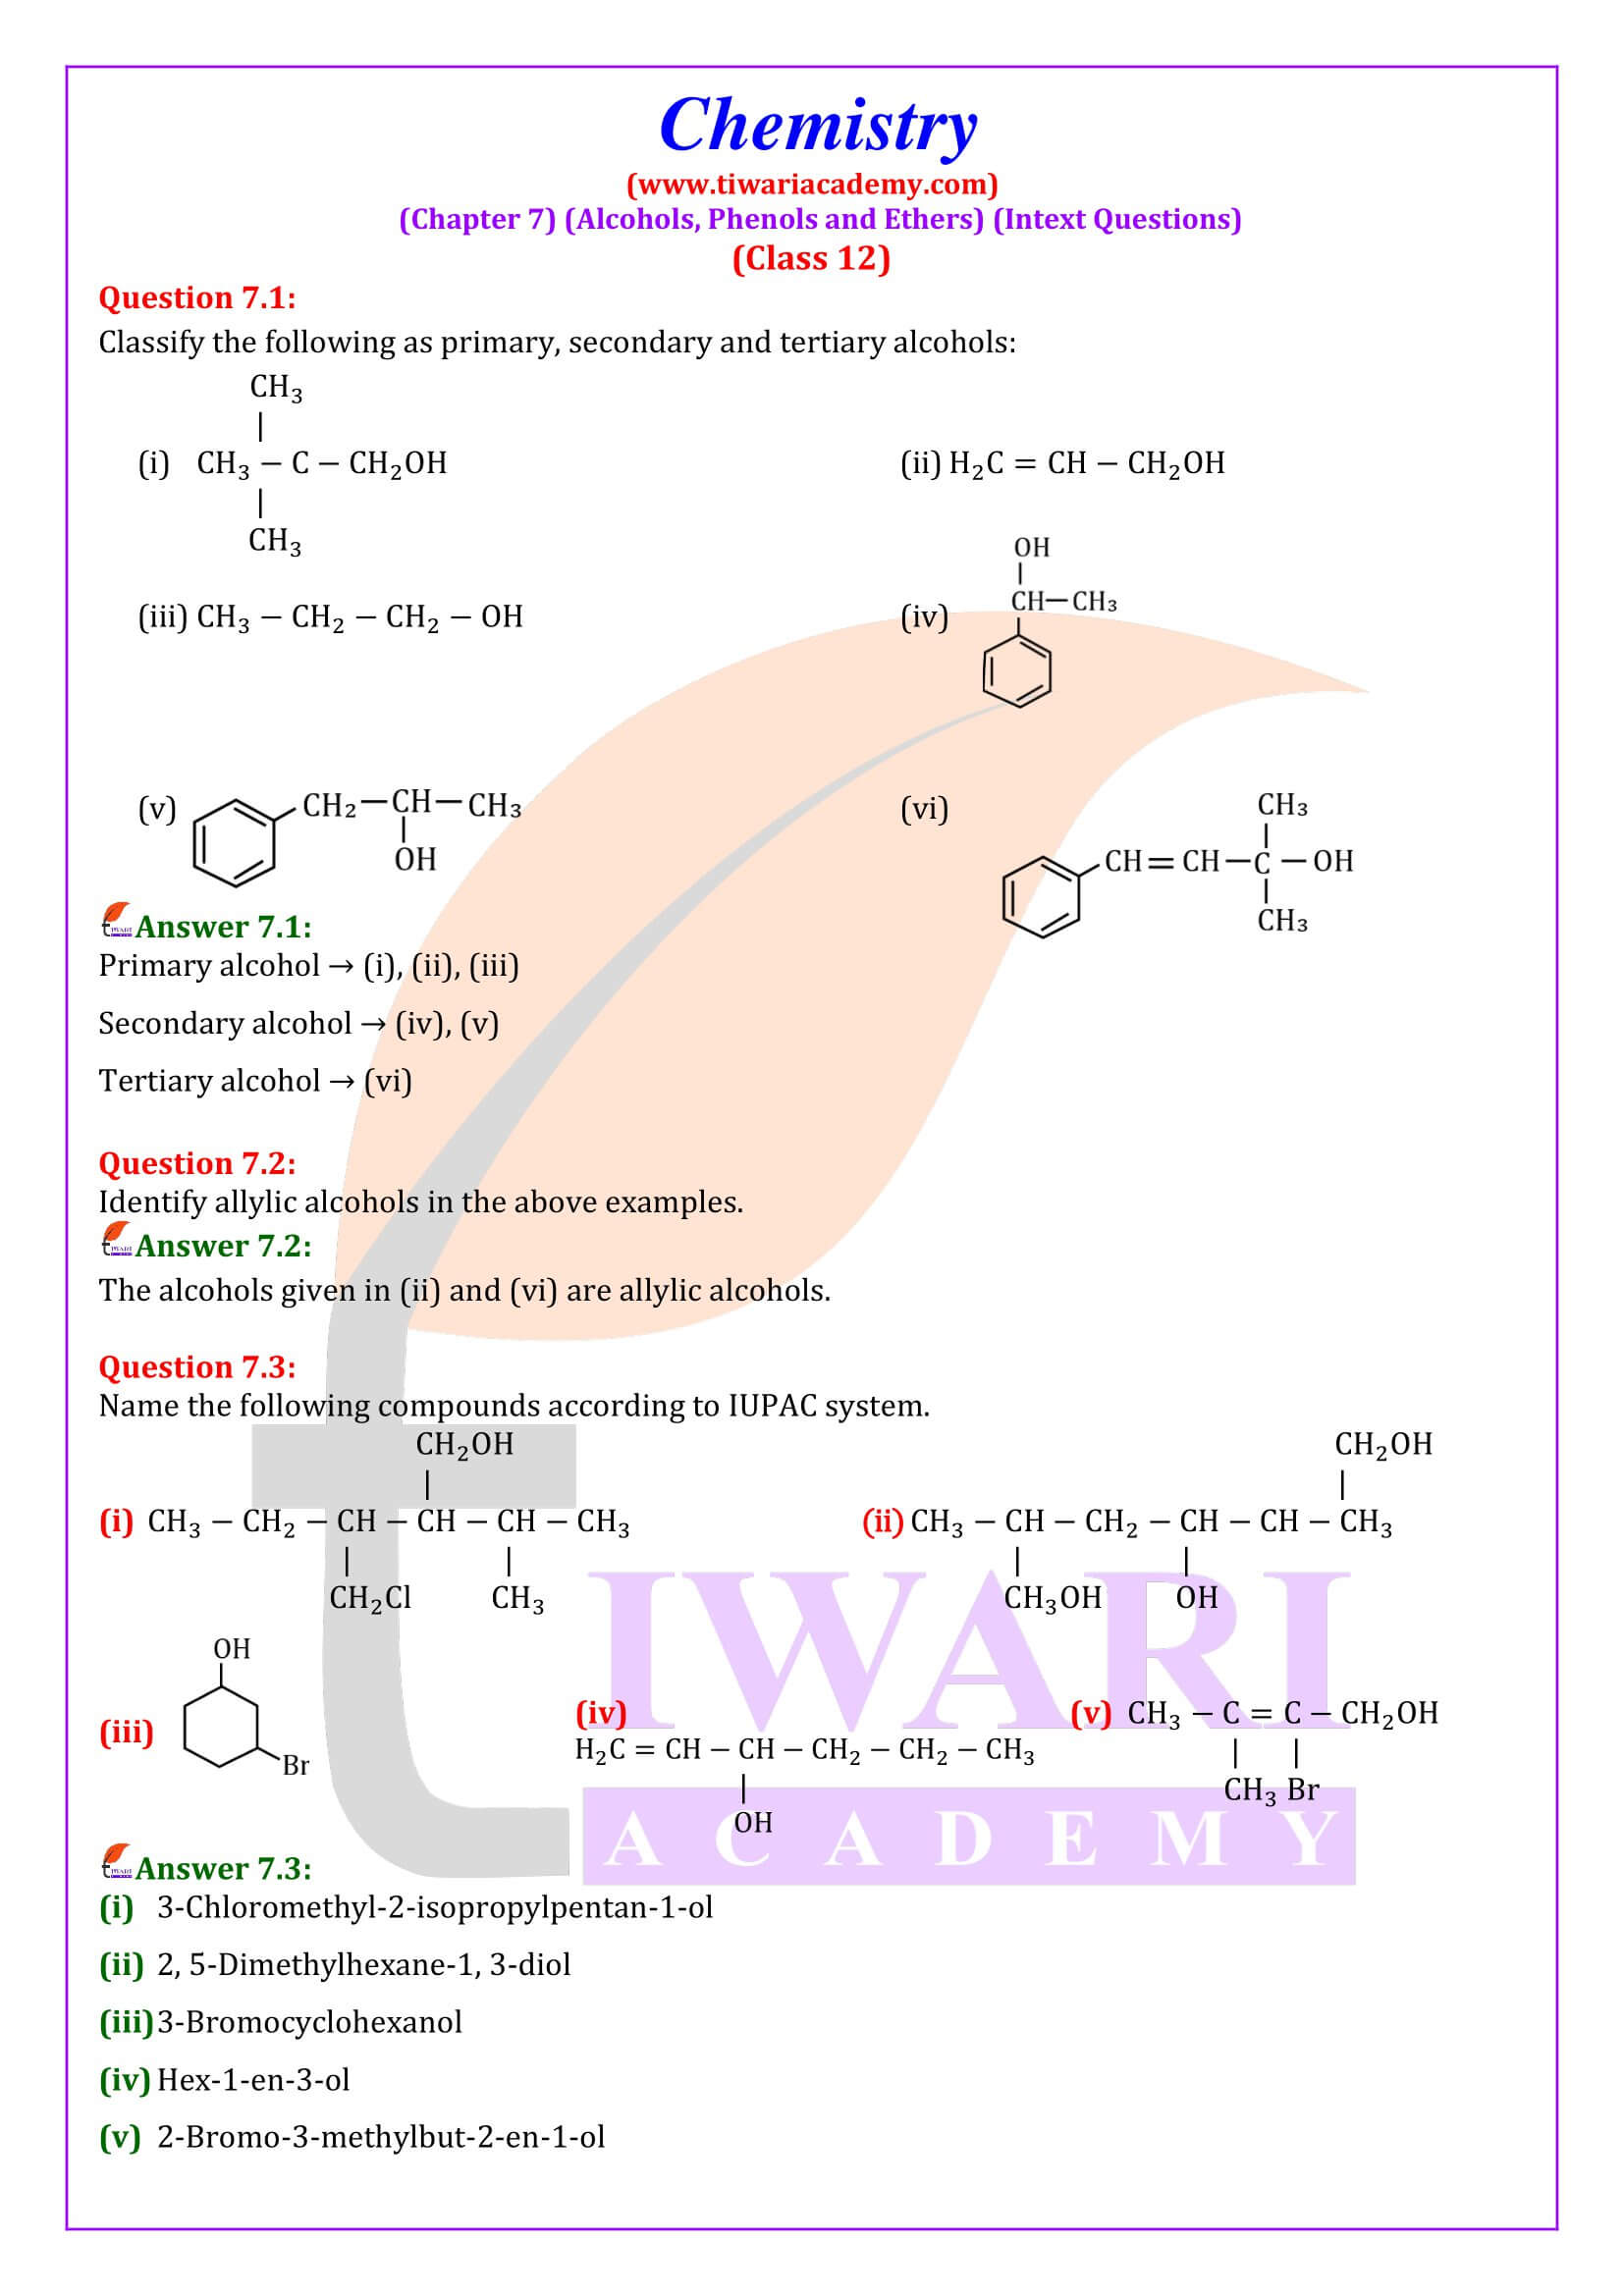 Class 12 Chemistry Chapter 7 Intext